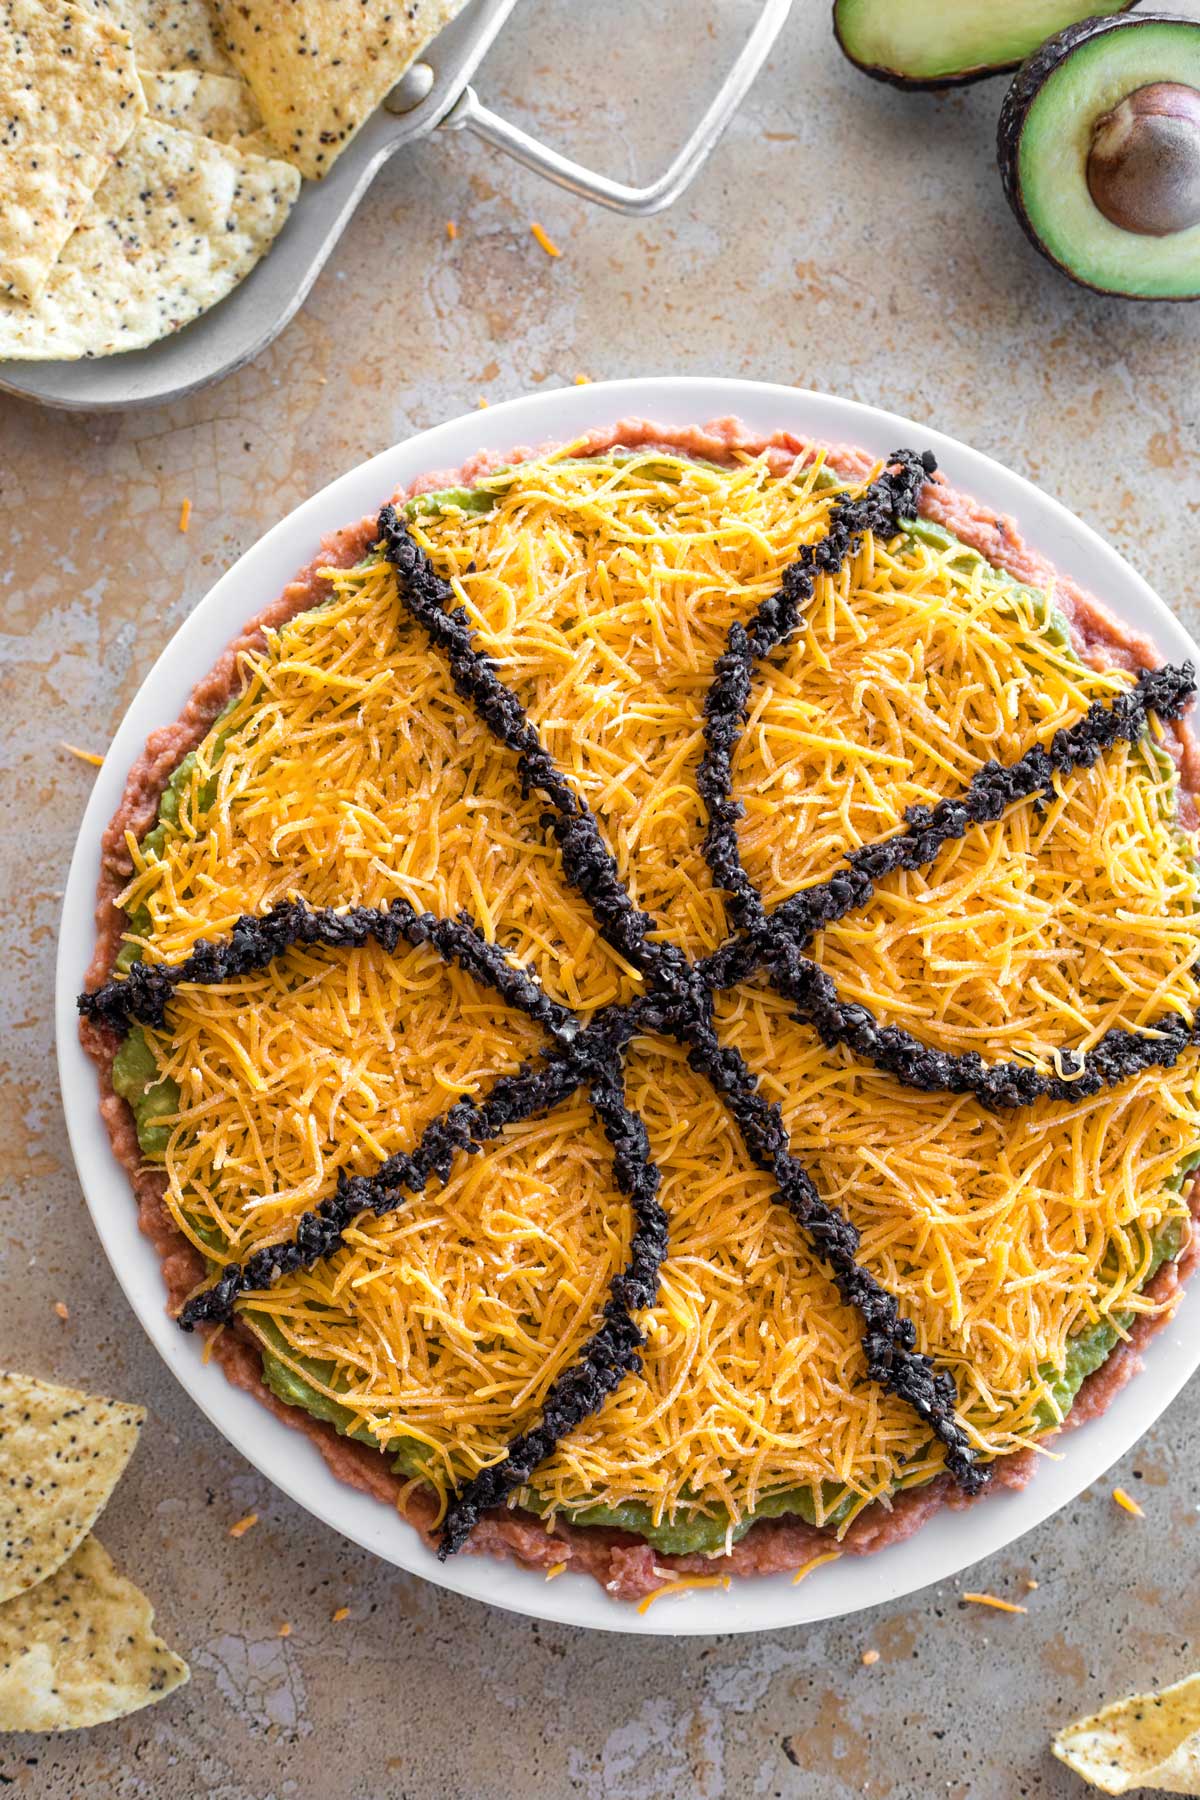 Overhead of finished March Madness layered dip, with tortilla chips and avocado halves decoratively in background.